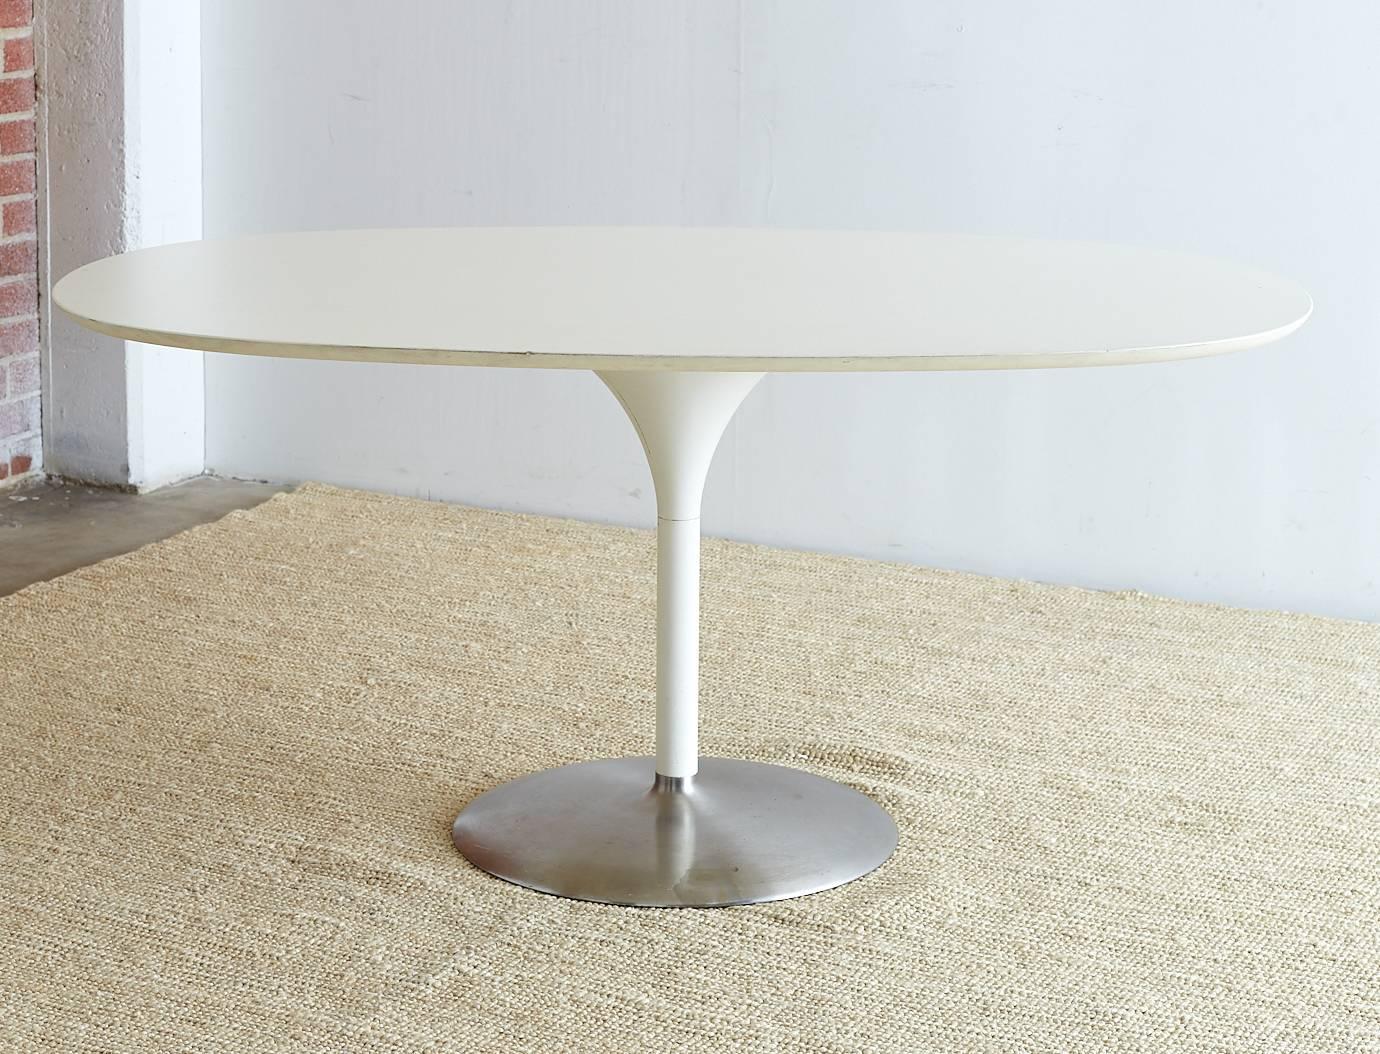 Stunning contemporary oval dining table featuring a tulip shaped base made in the manner and style of Eero Saarinen. Large dining table with an oval shaped top having a cast iron pedestal supported by a brushed steel round bottom. Unique take on an